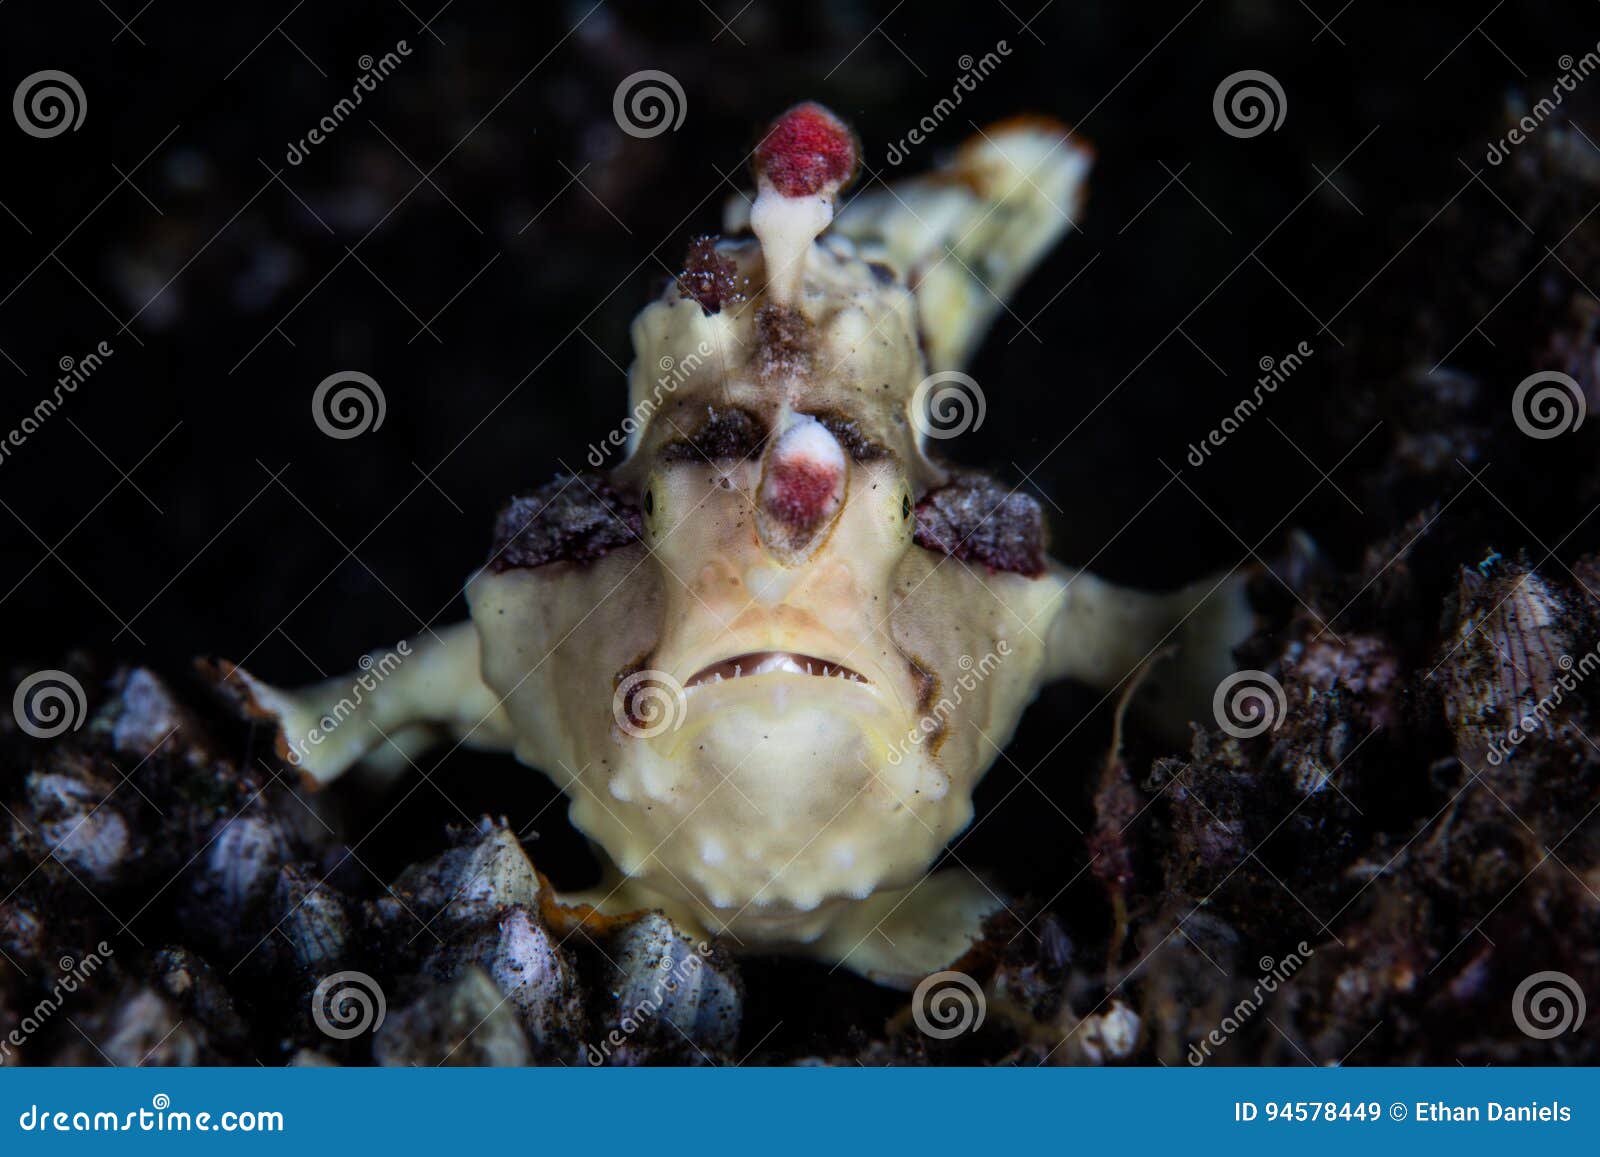 warty frogfish on seafloor in indonesia